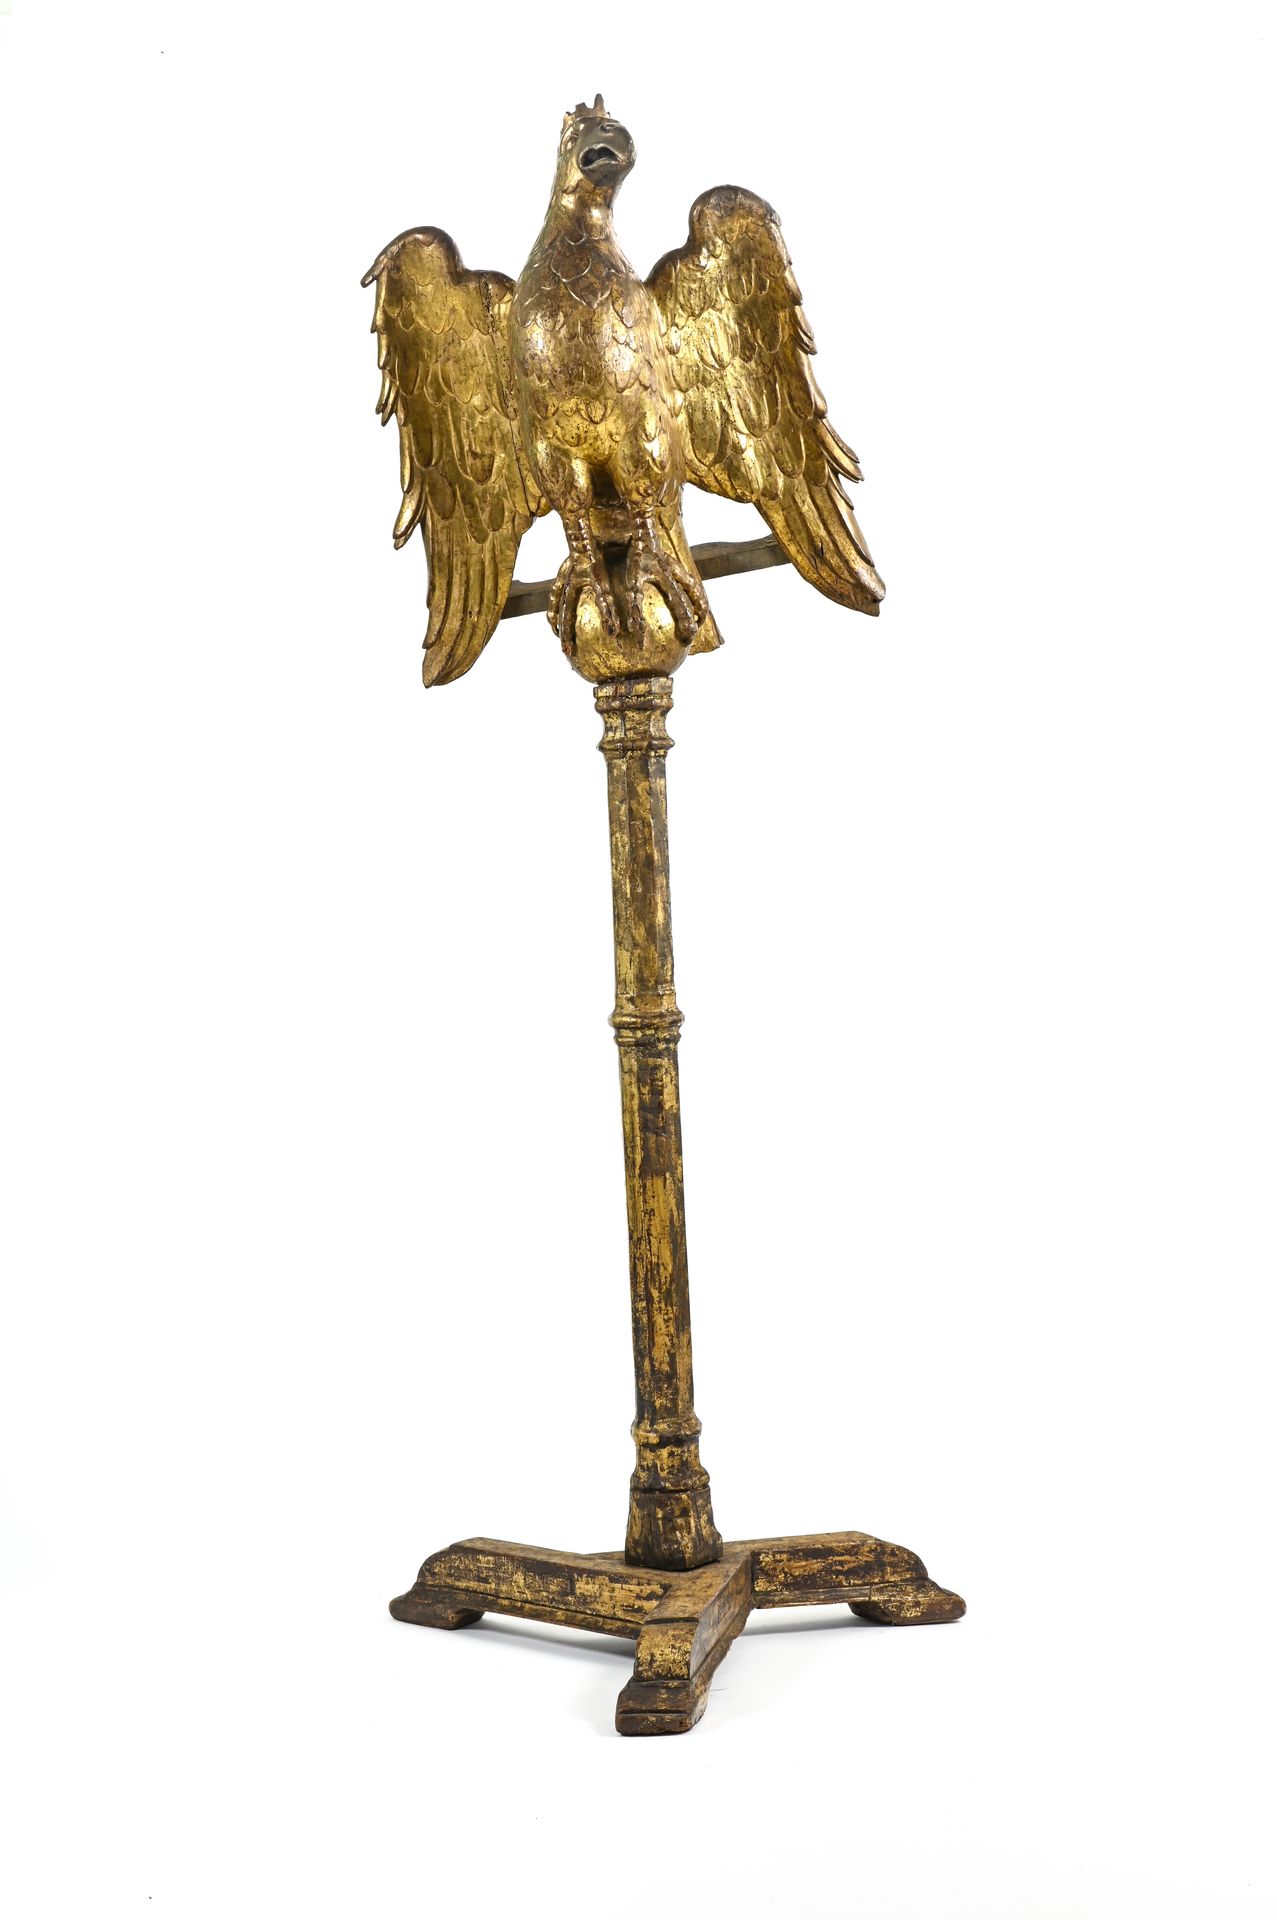 Lutrin monumental à l'aigle Very large lectern with an eagle

18TH CENTURY WORK
&hellip;